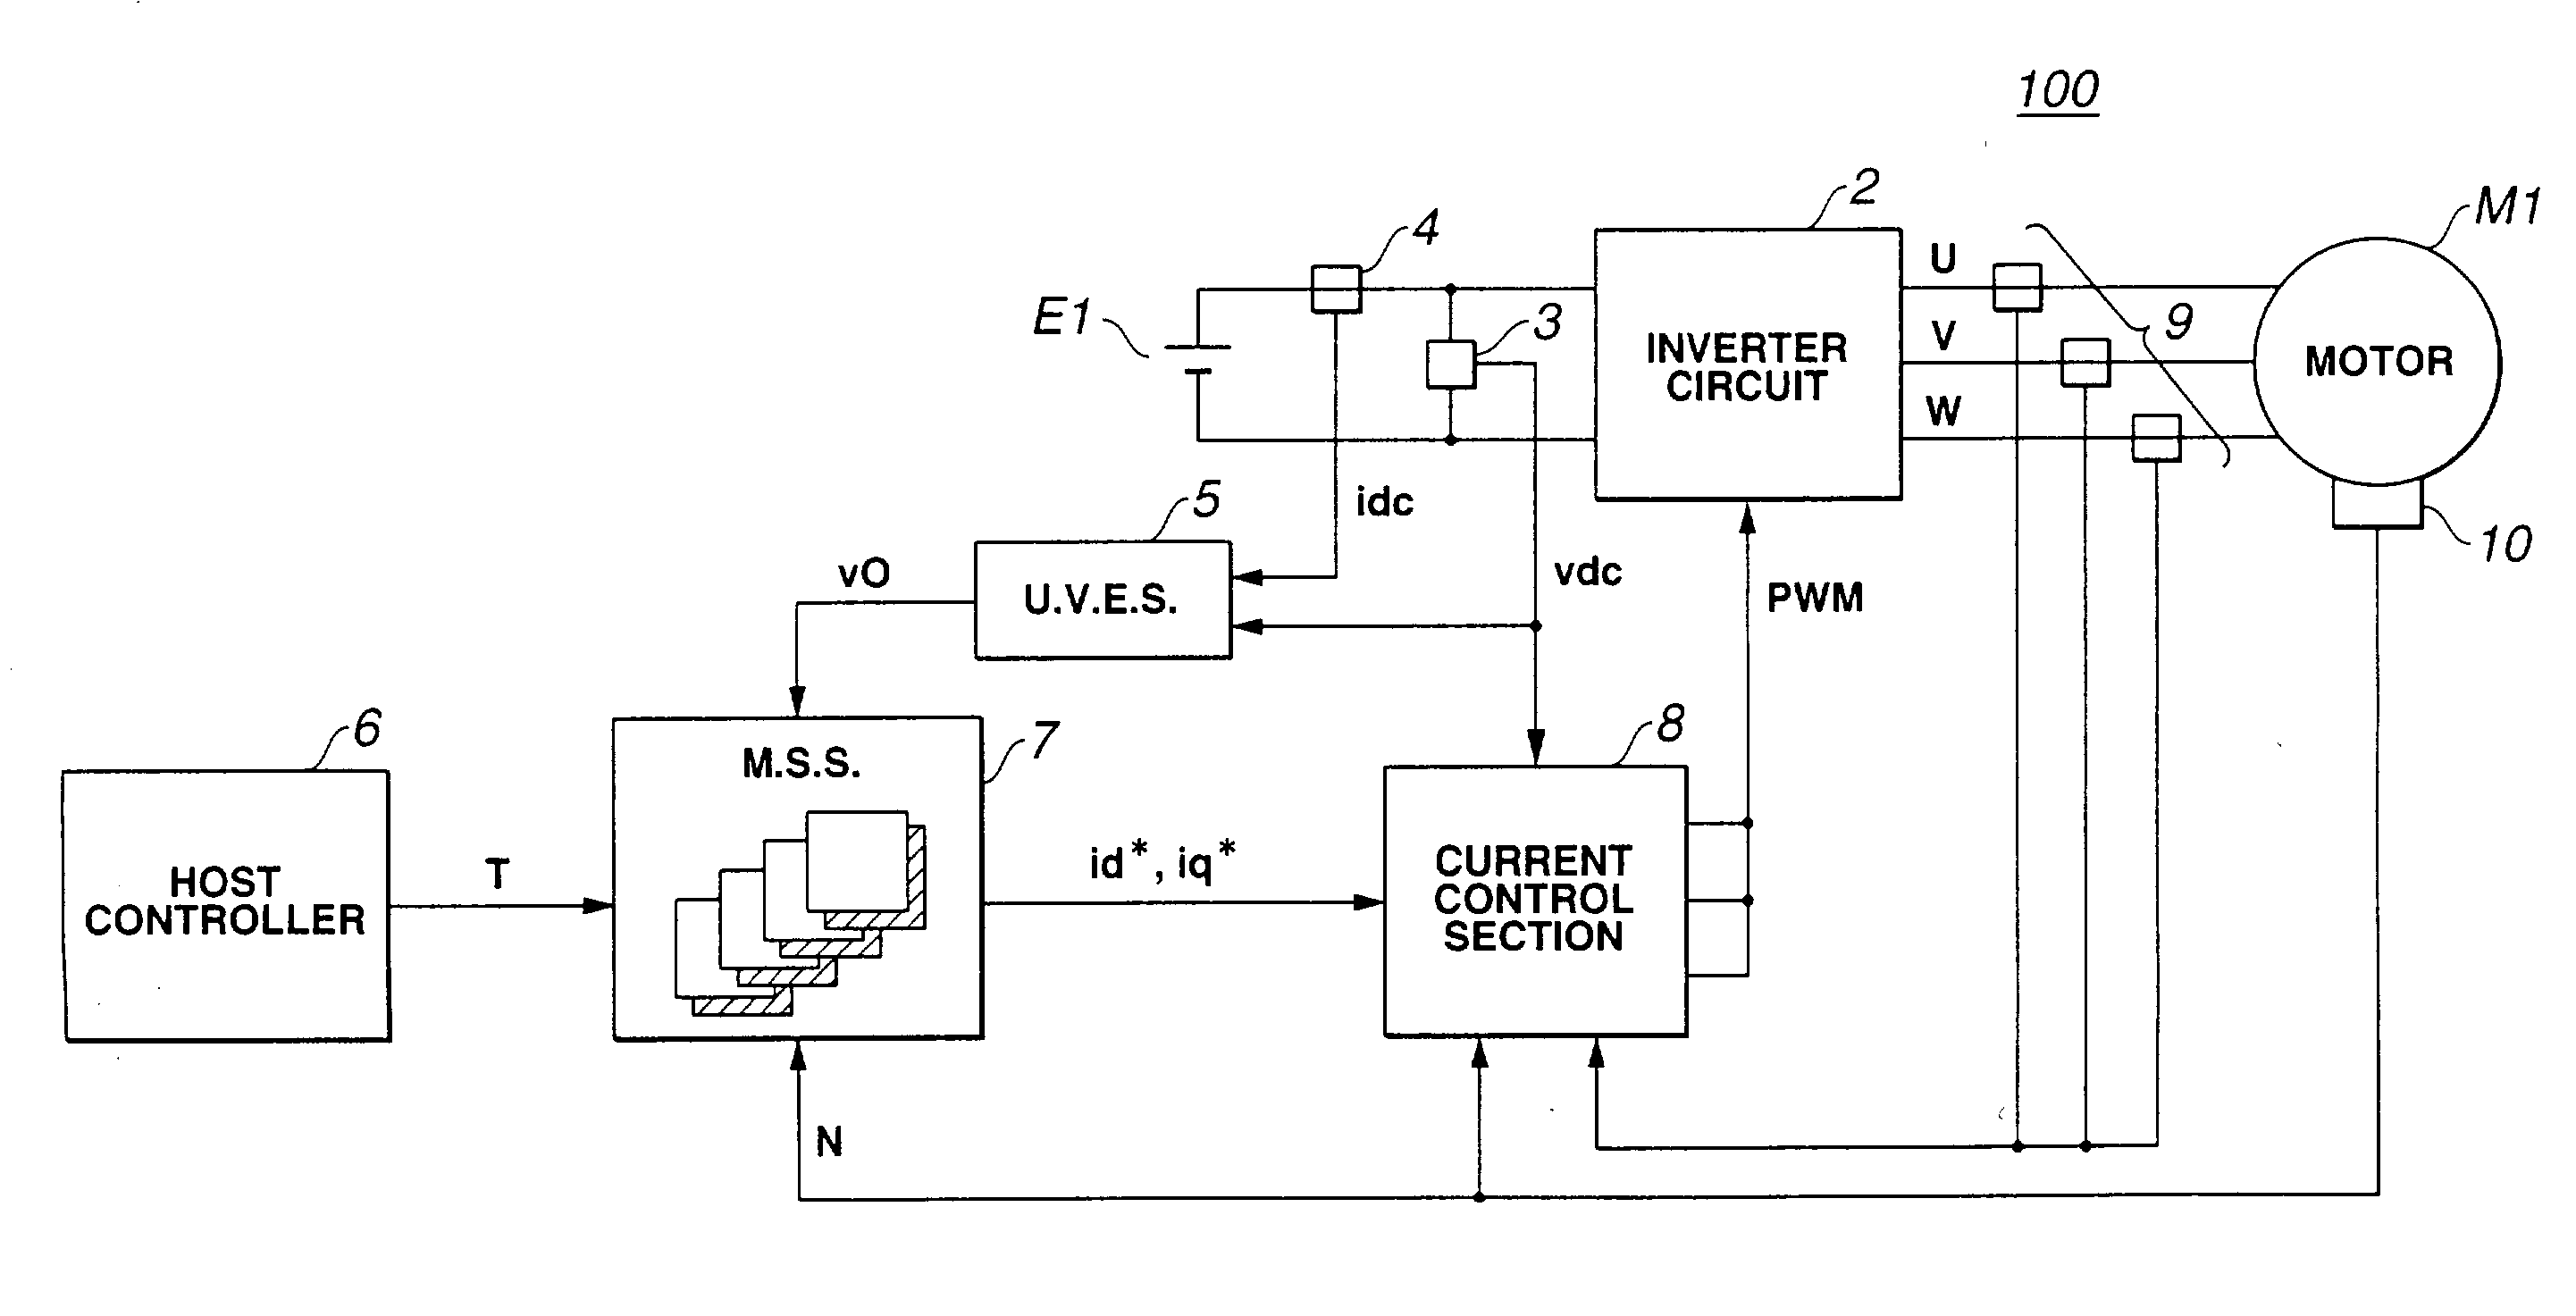 Control system of electric motor